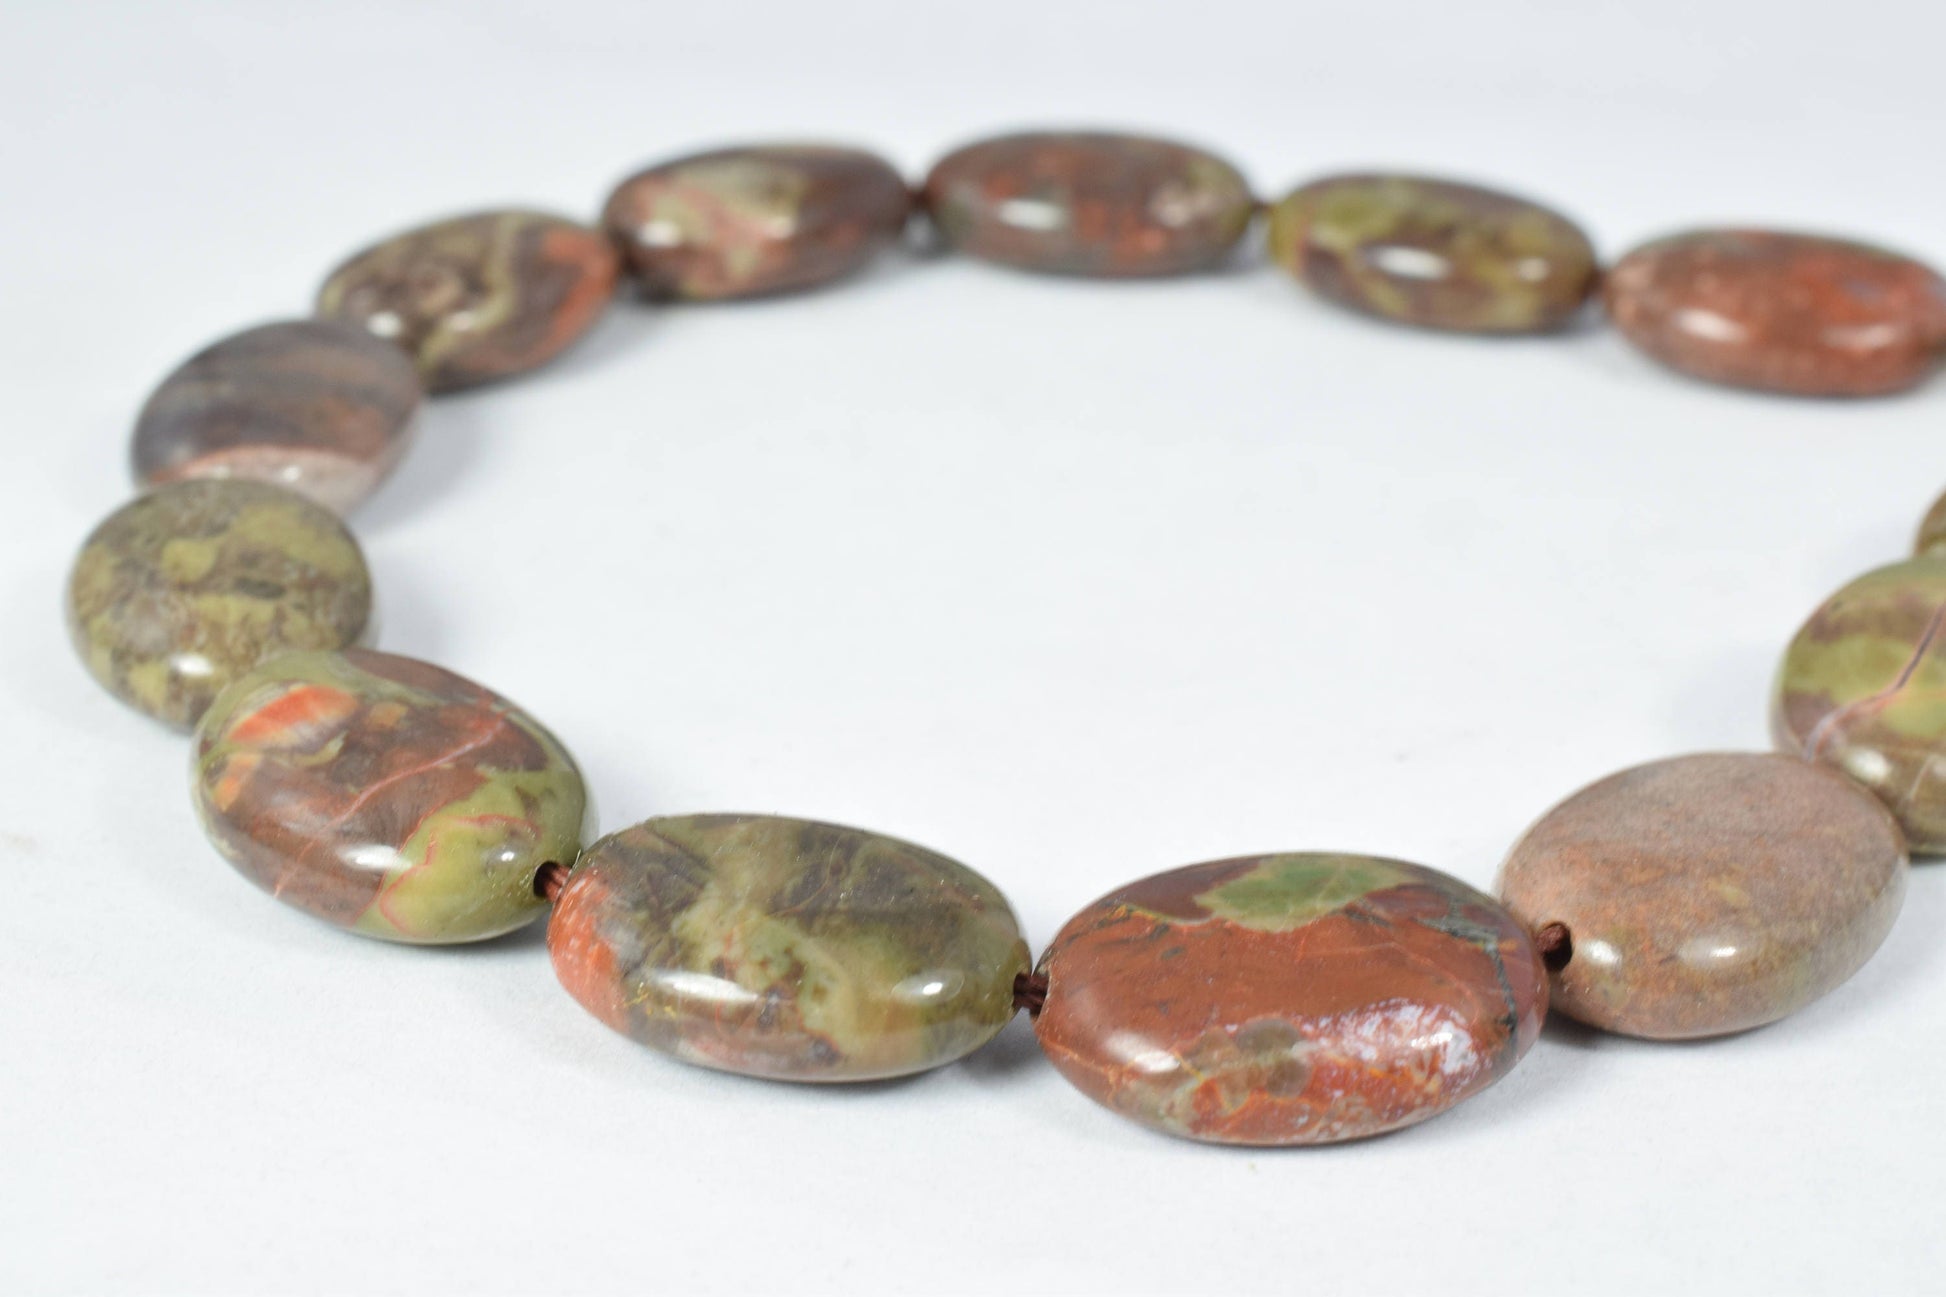 Jasper Beads Stone Beads, 24x20mm, 1.5mm hole opening ,Add your own clasp and this item is ready to wear! Wholesale Gemstone,Jasper